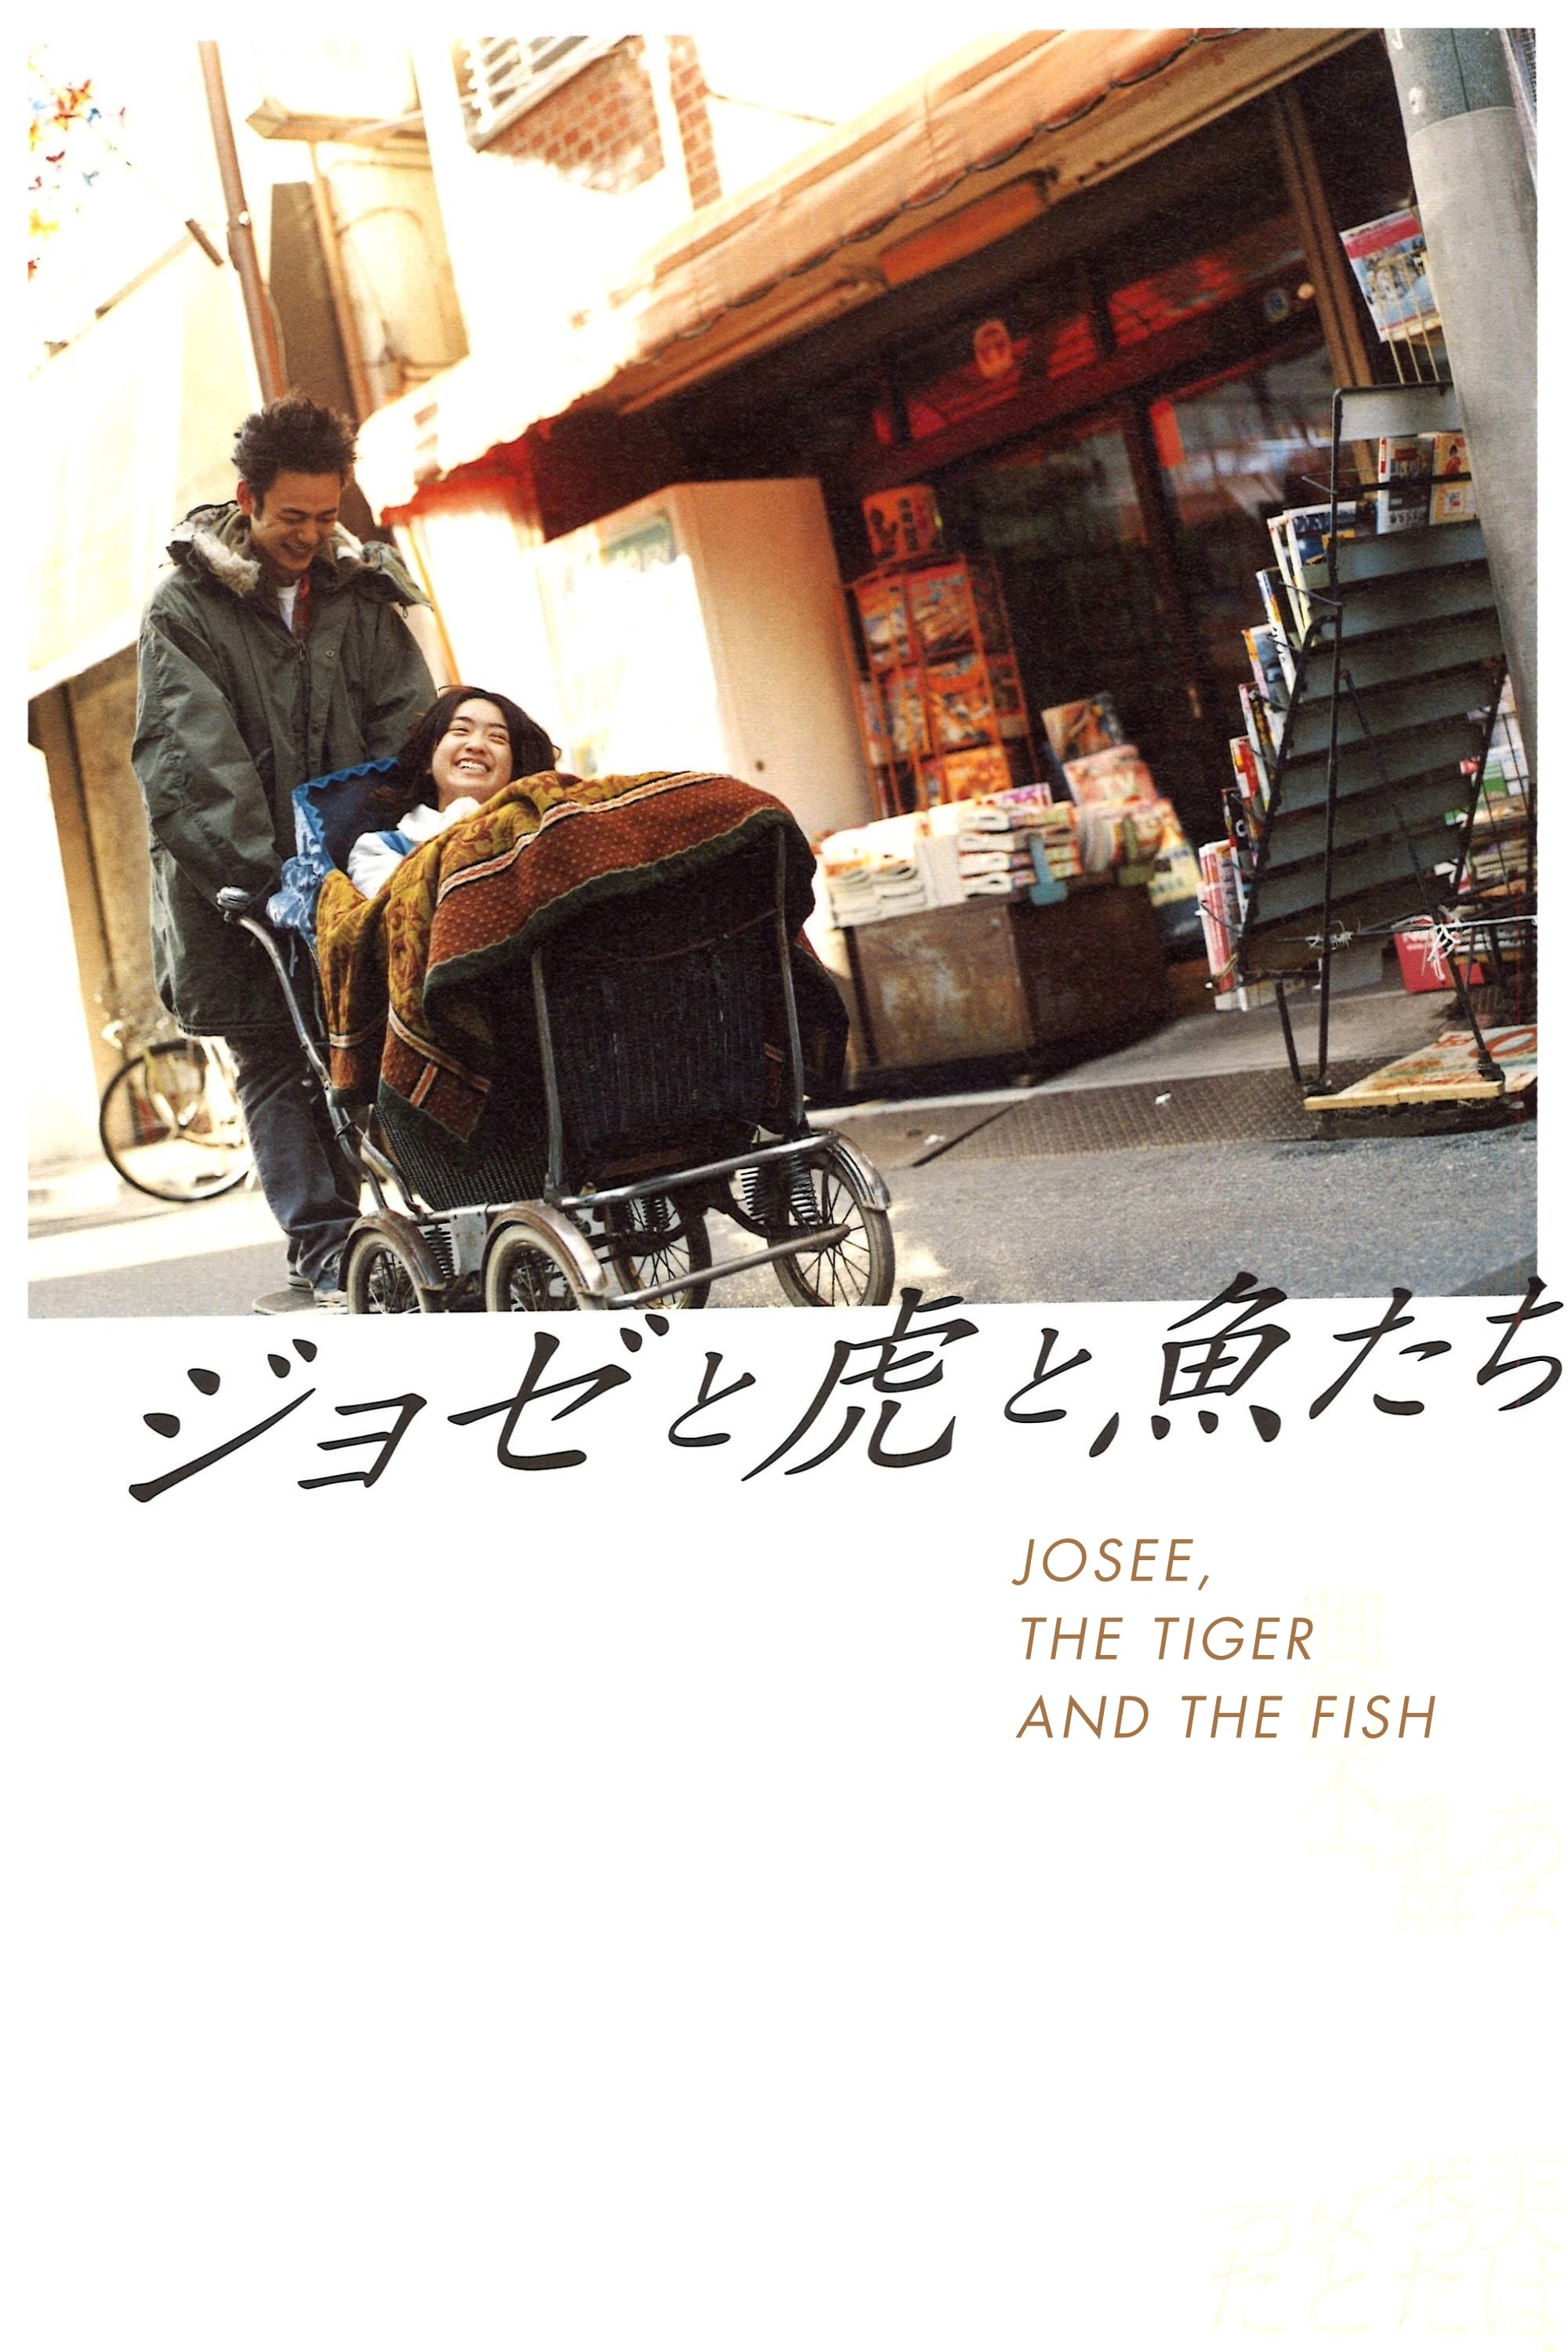 Josee, the Tiger and the Fish (2003)